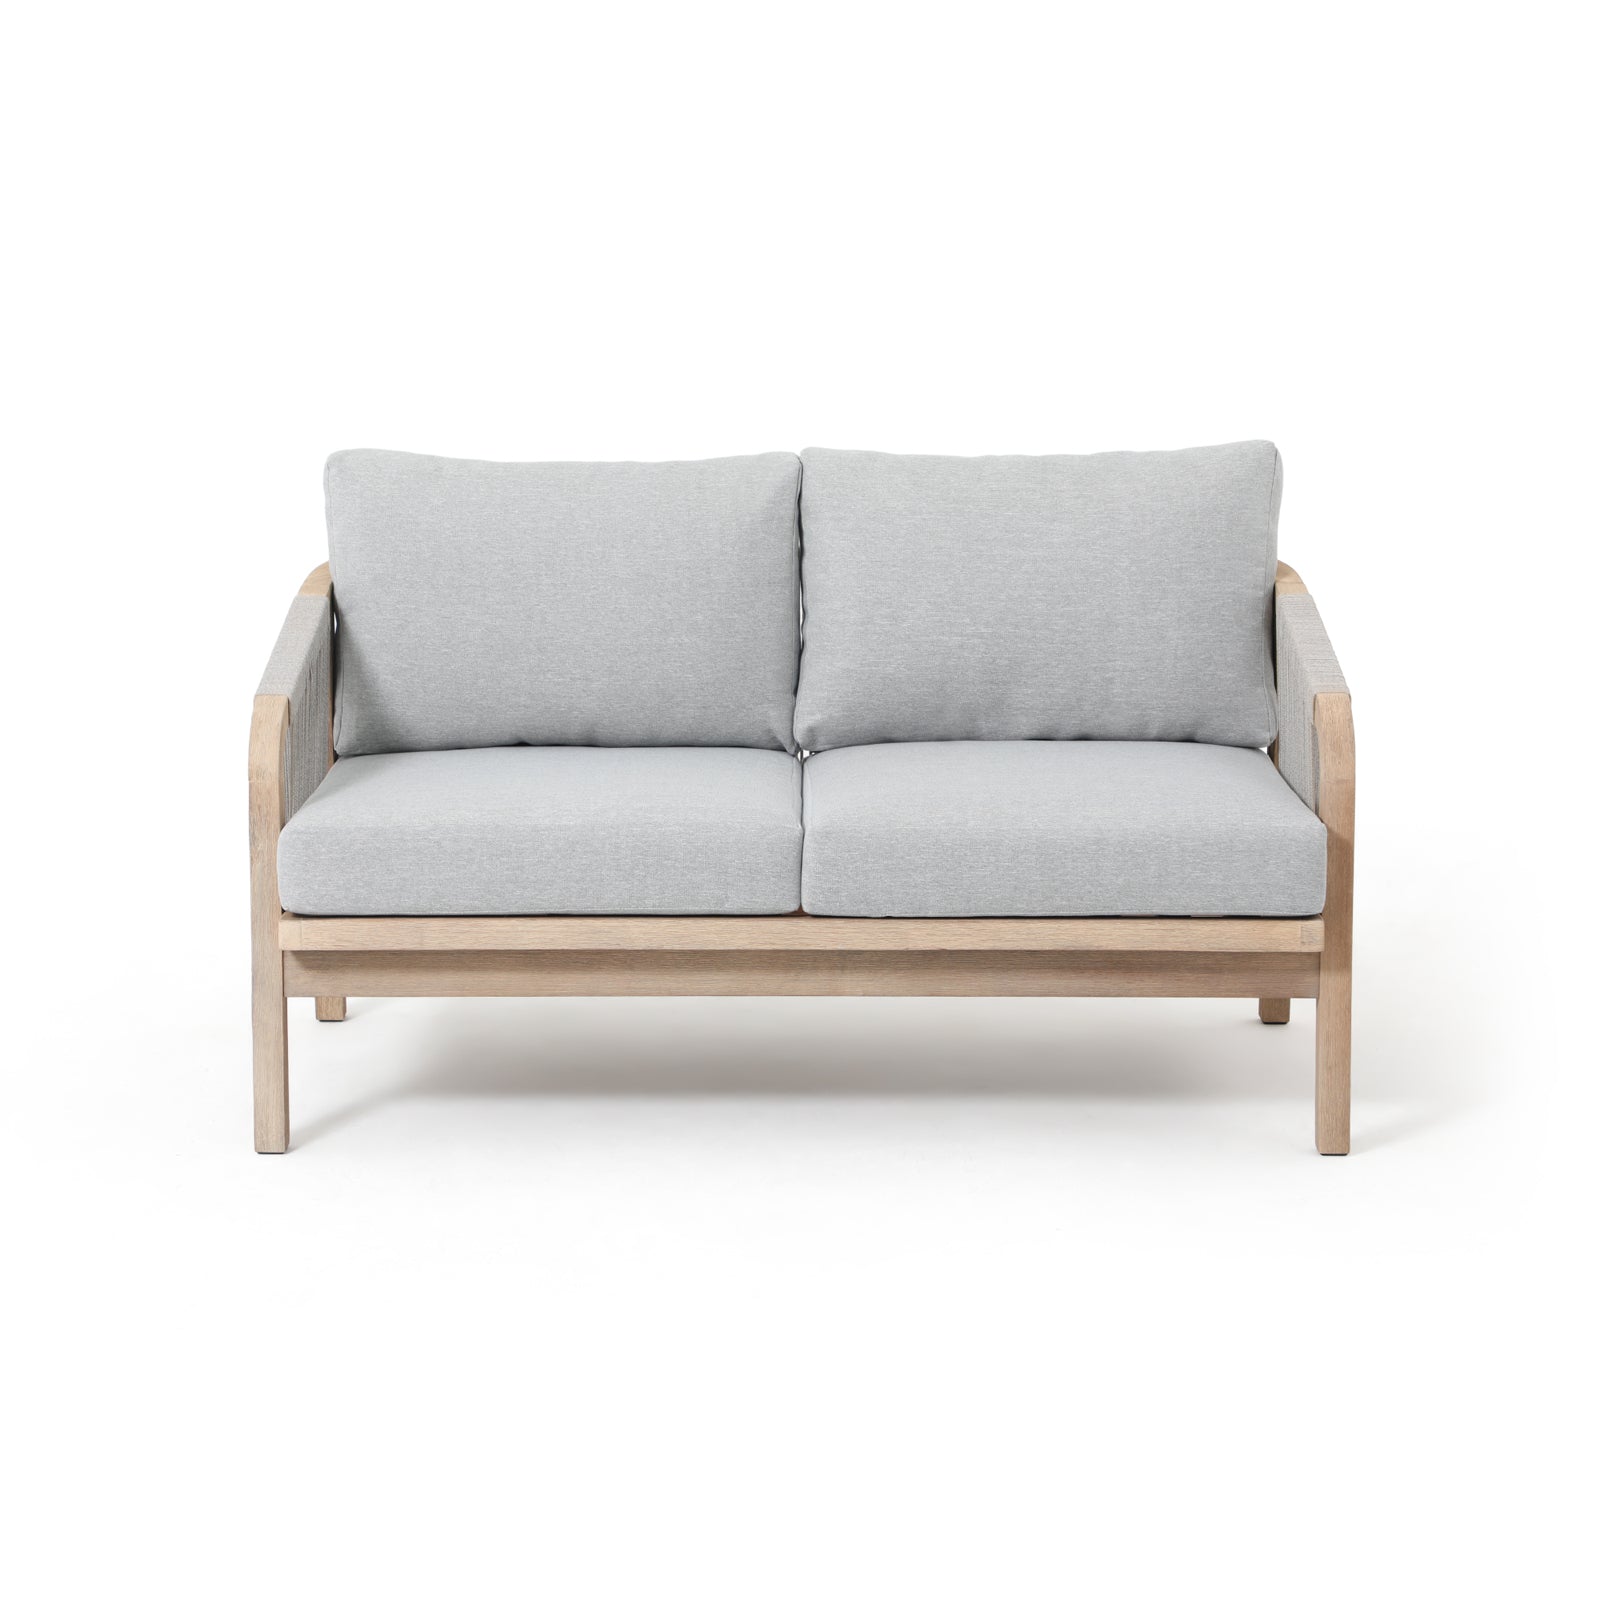 Thalea Double Louge With Cushions